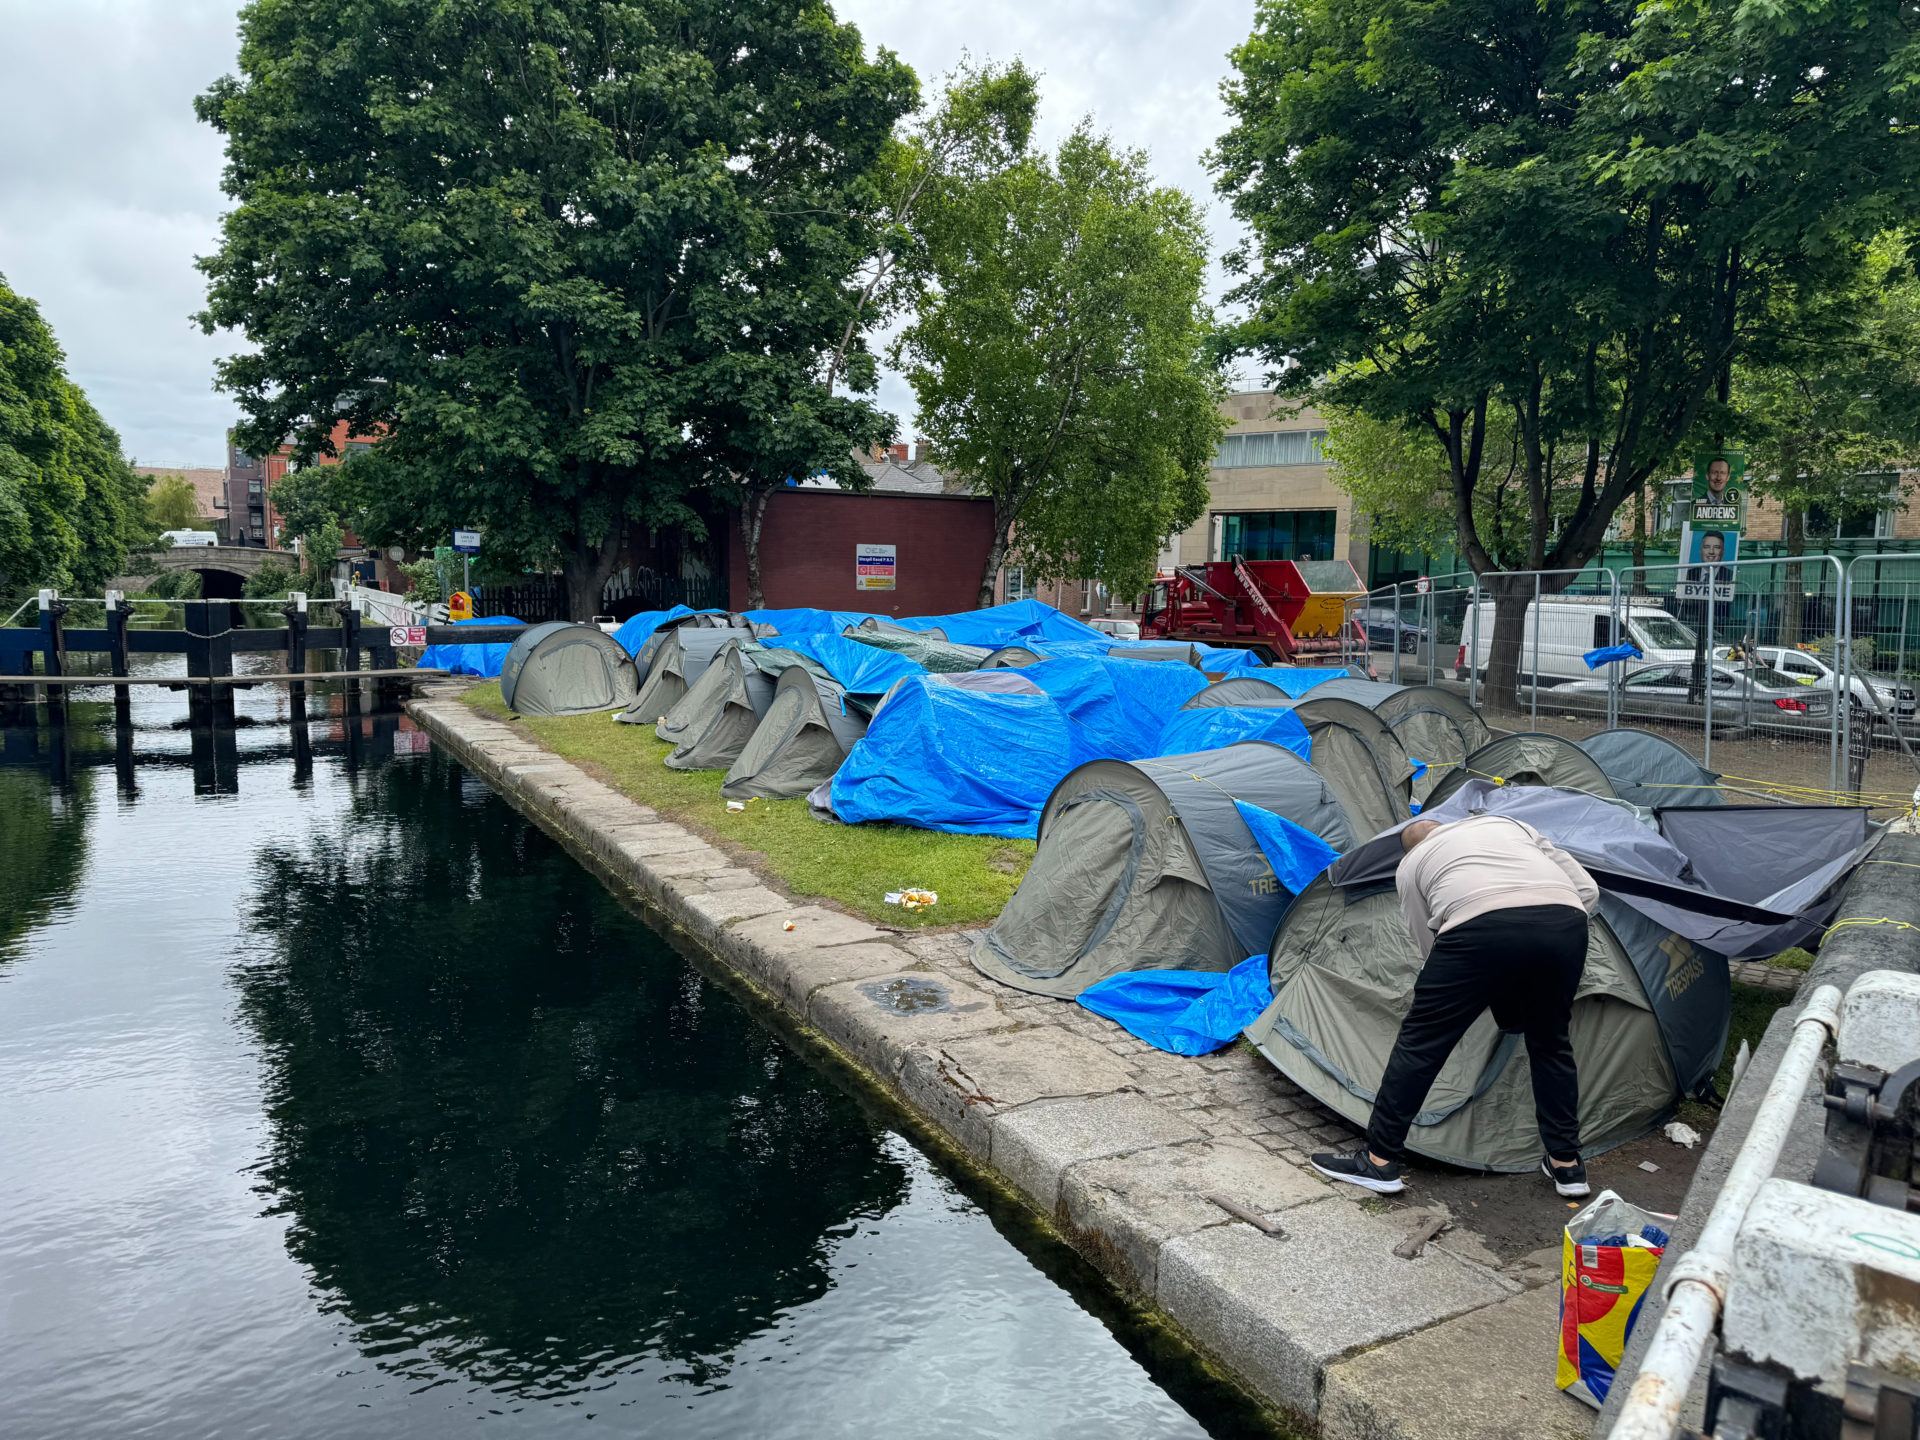 Tents belonging to asylum seekers along the banks of the Grand Canal in Dublin, 29-5-24.